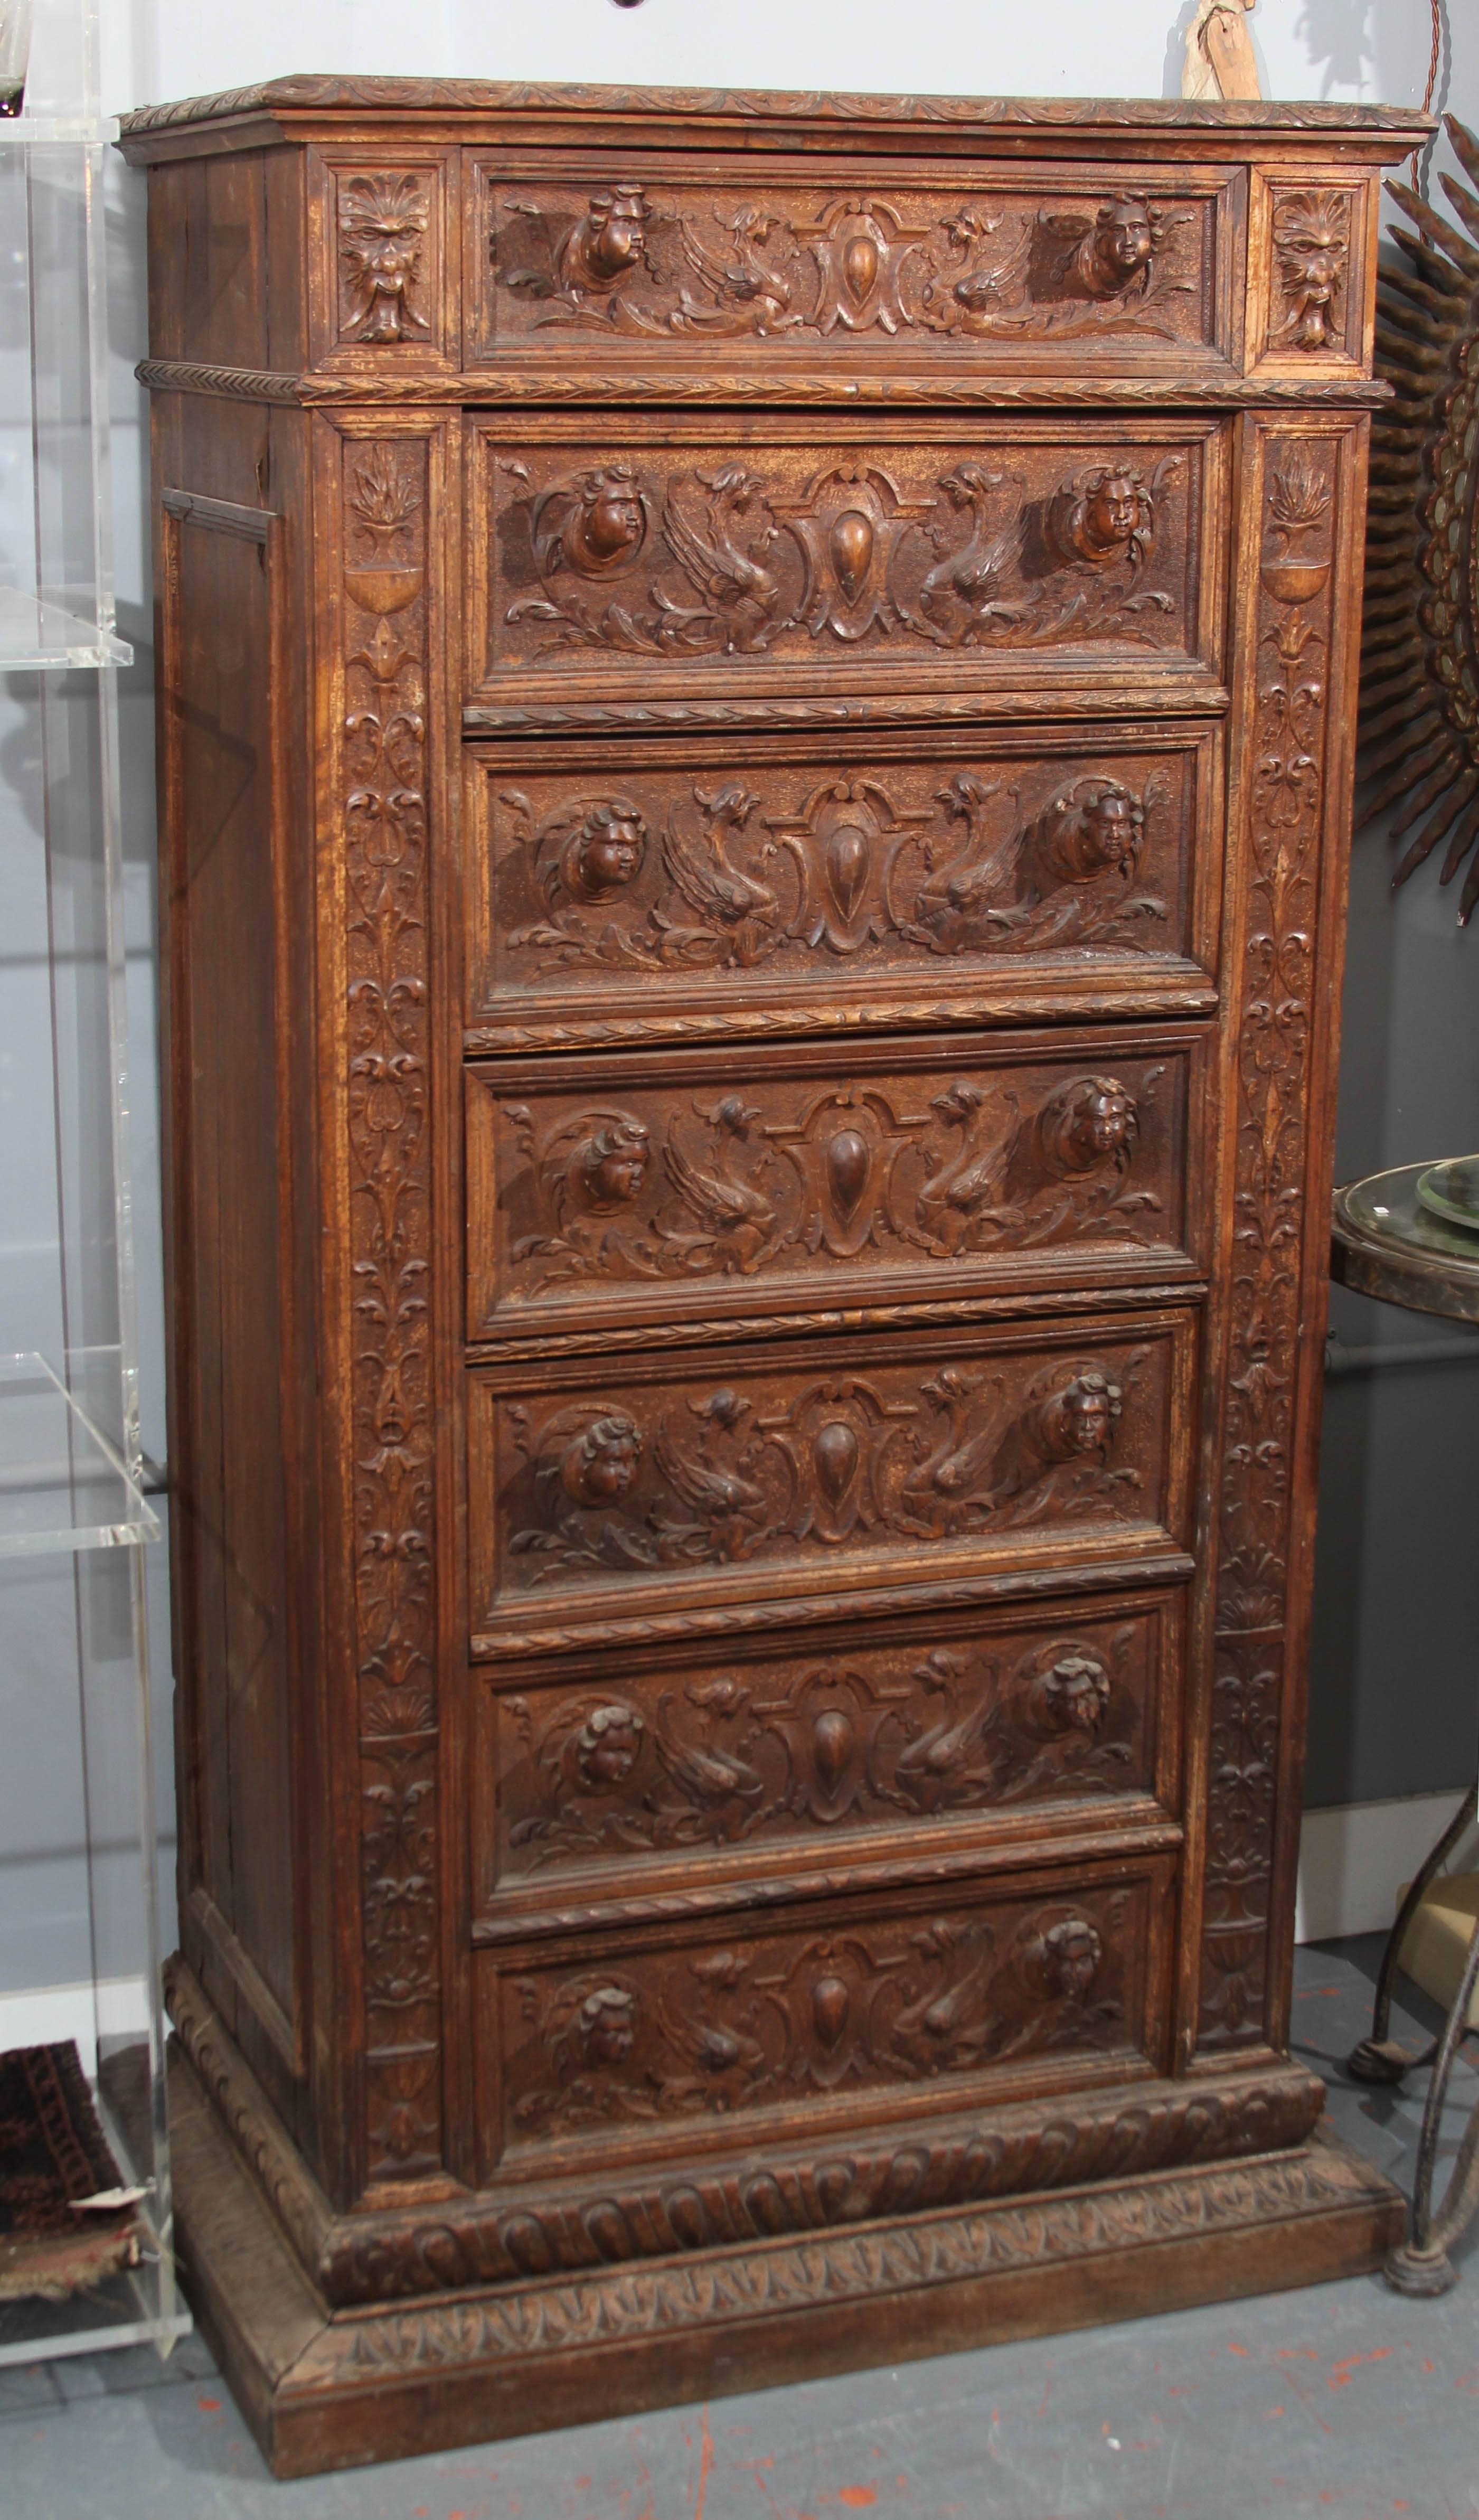 Carved highboy, tall chest with seven drawers. Very interesting piece of Folk Art with ample storage. Likely Italian.